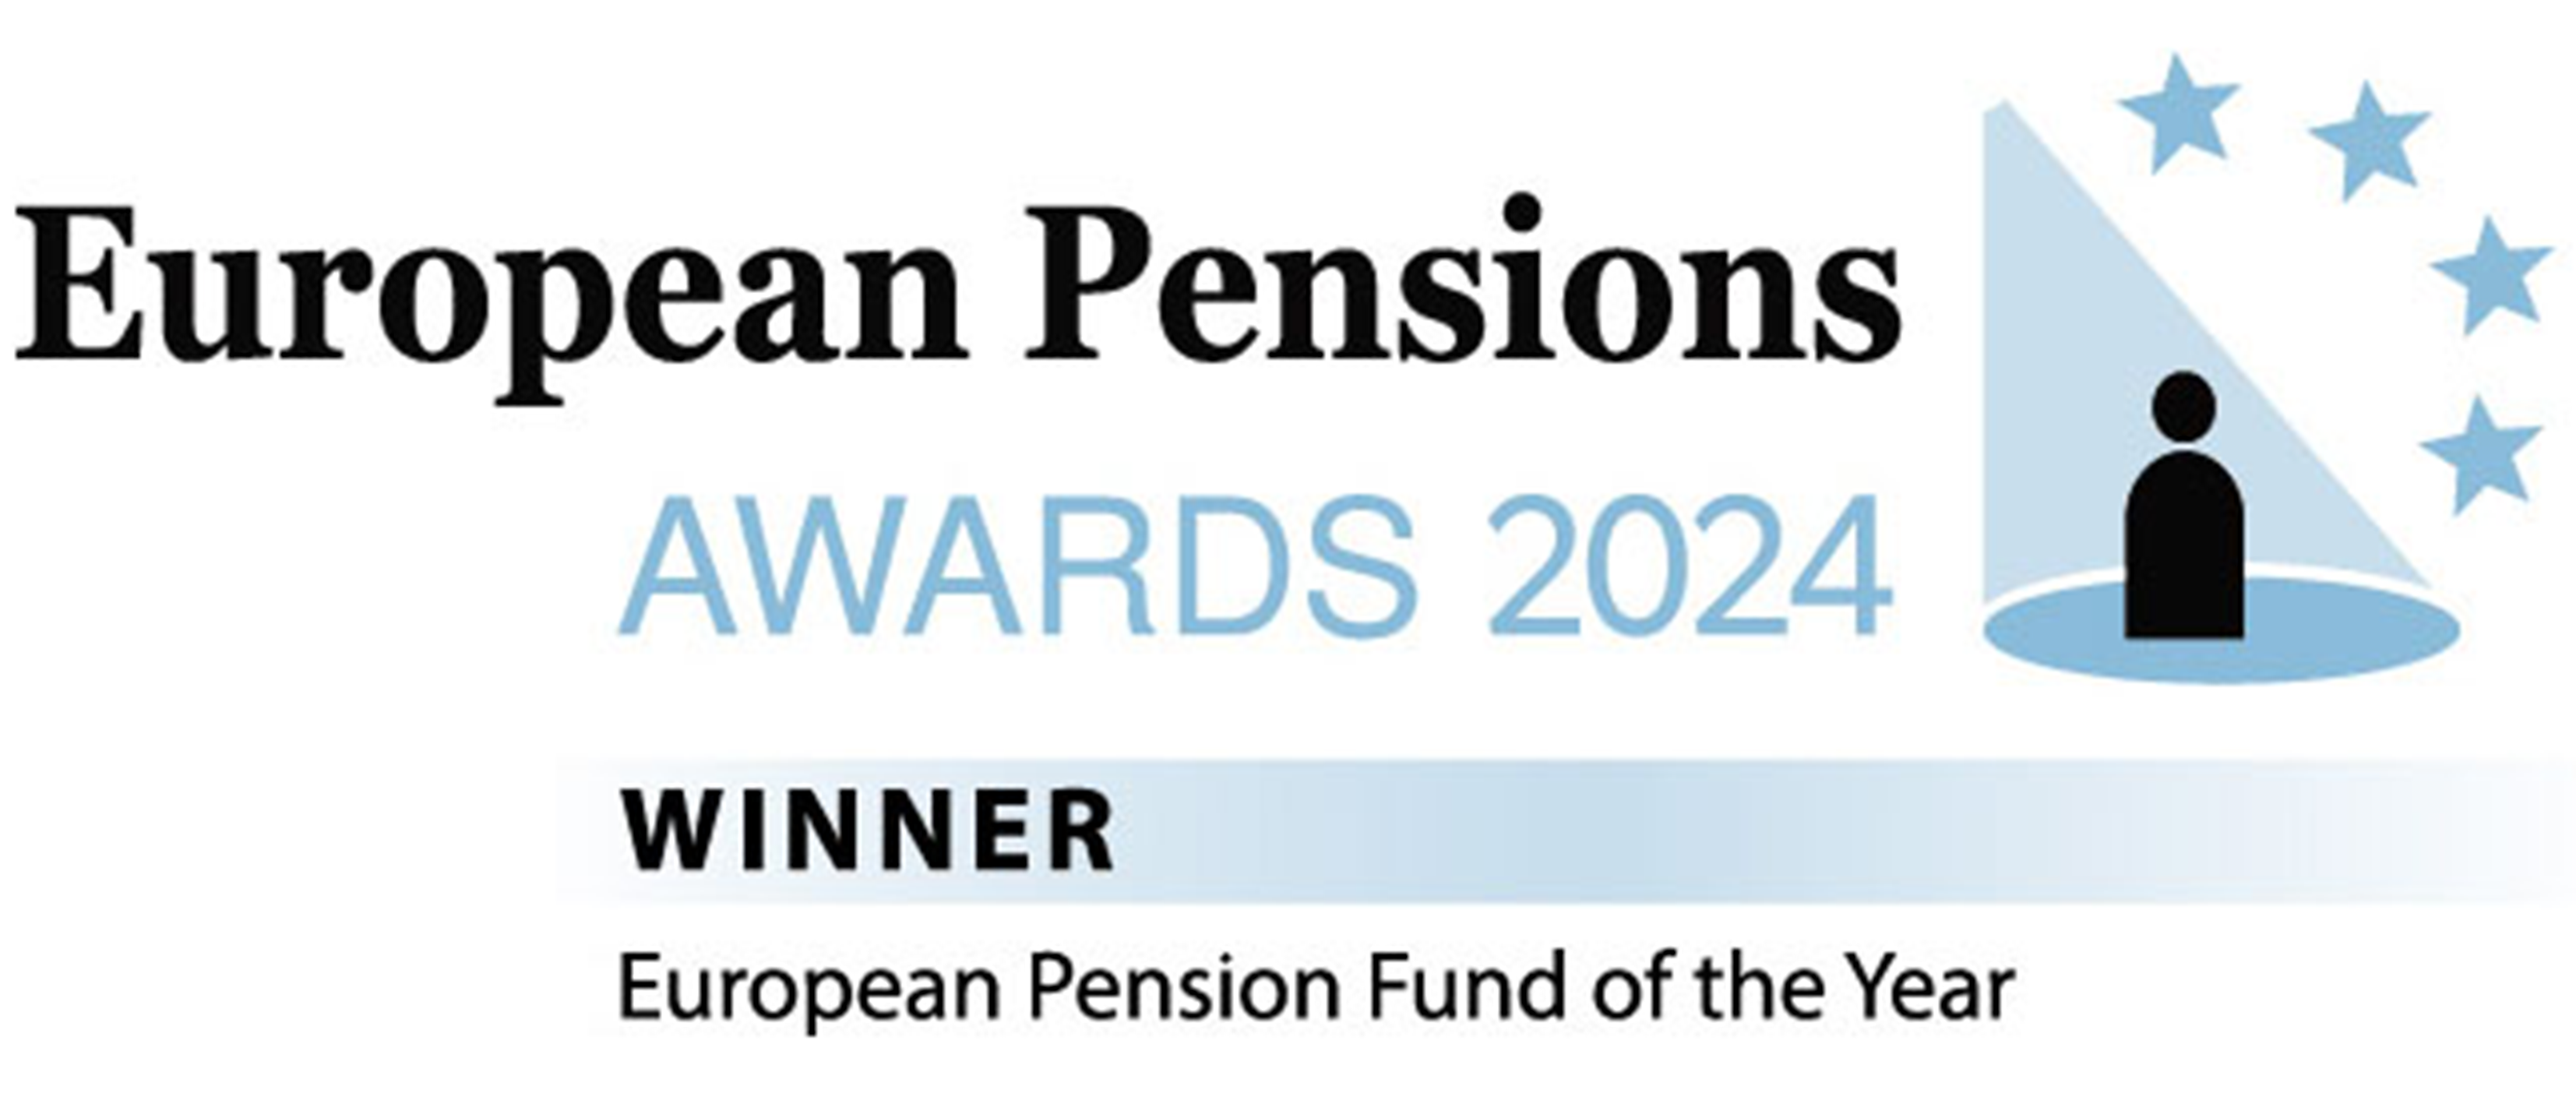 European pensions awards 2024 European Pension Fund of the Year